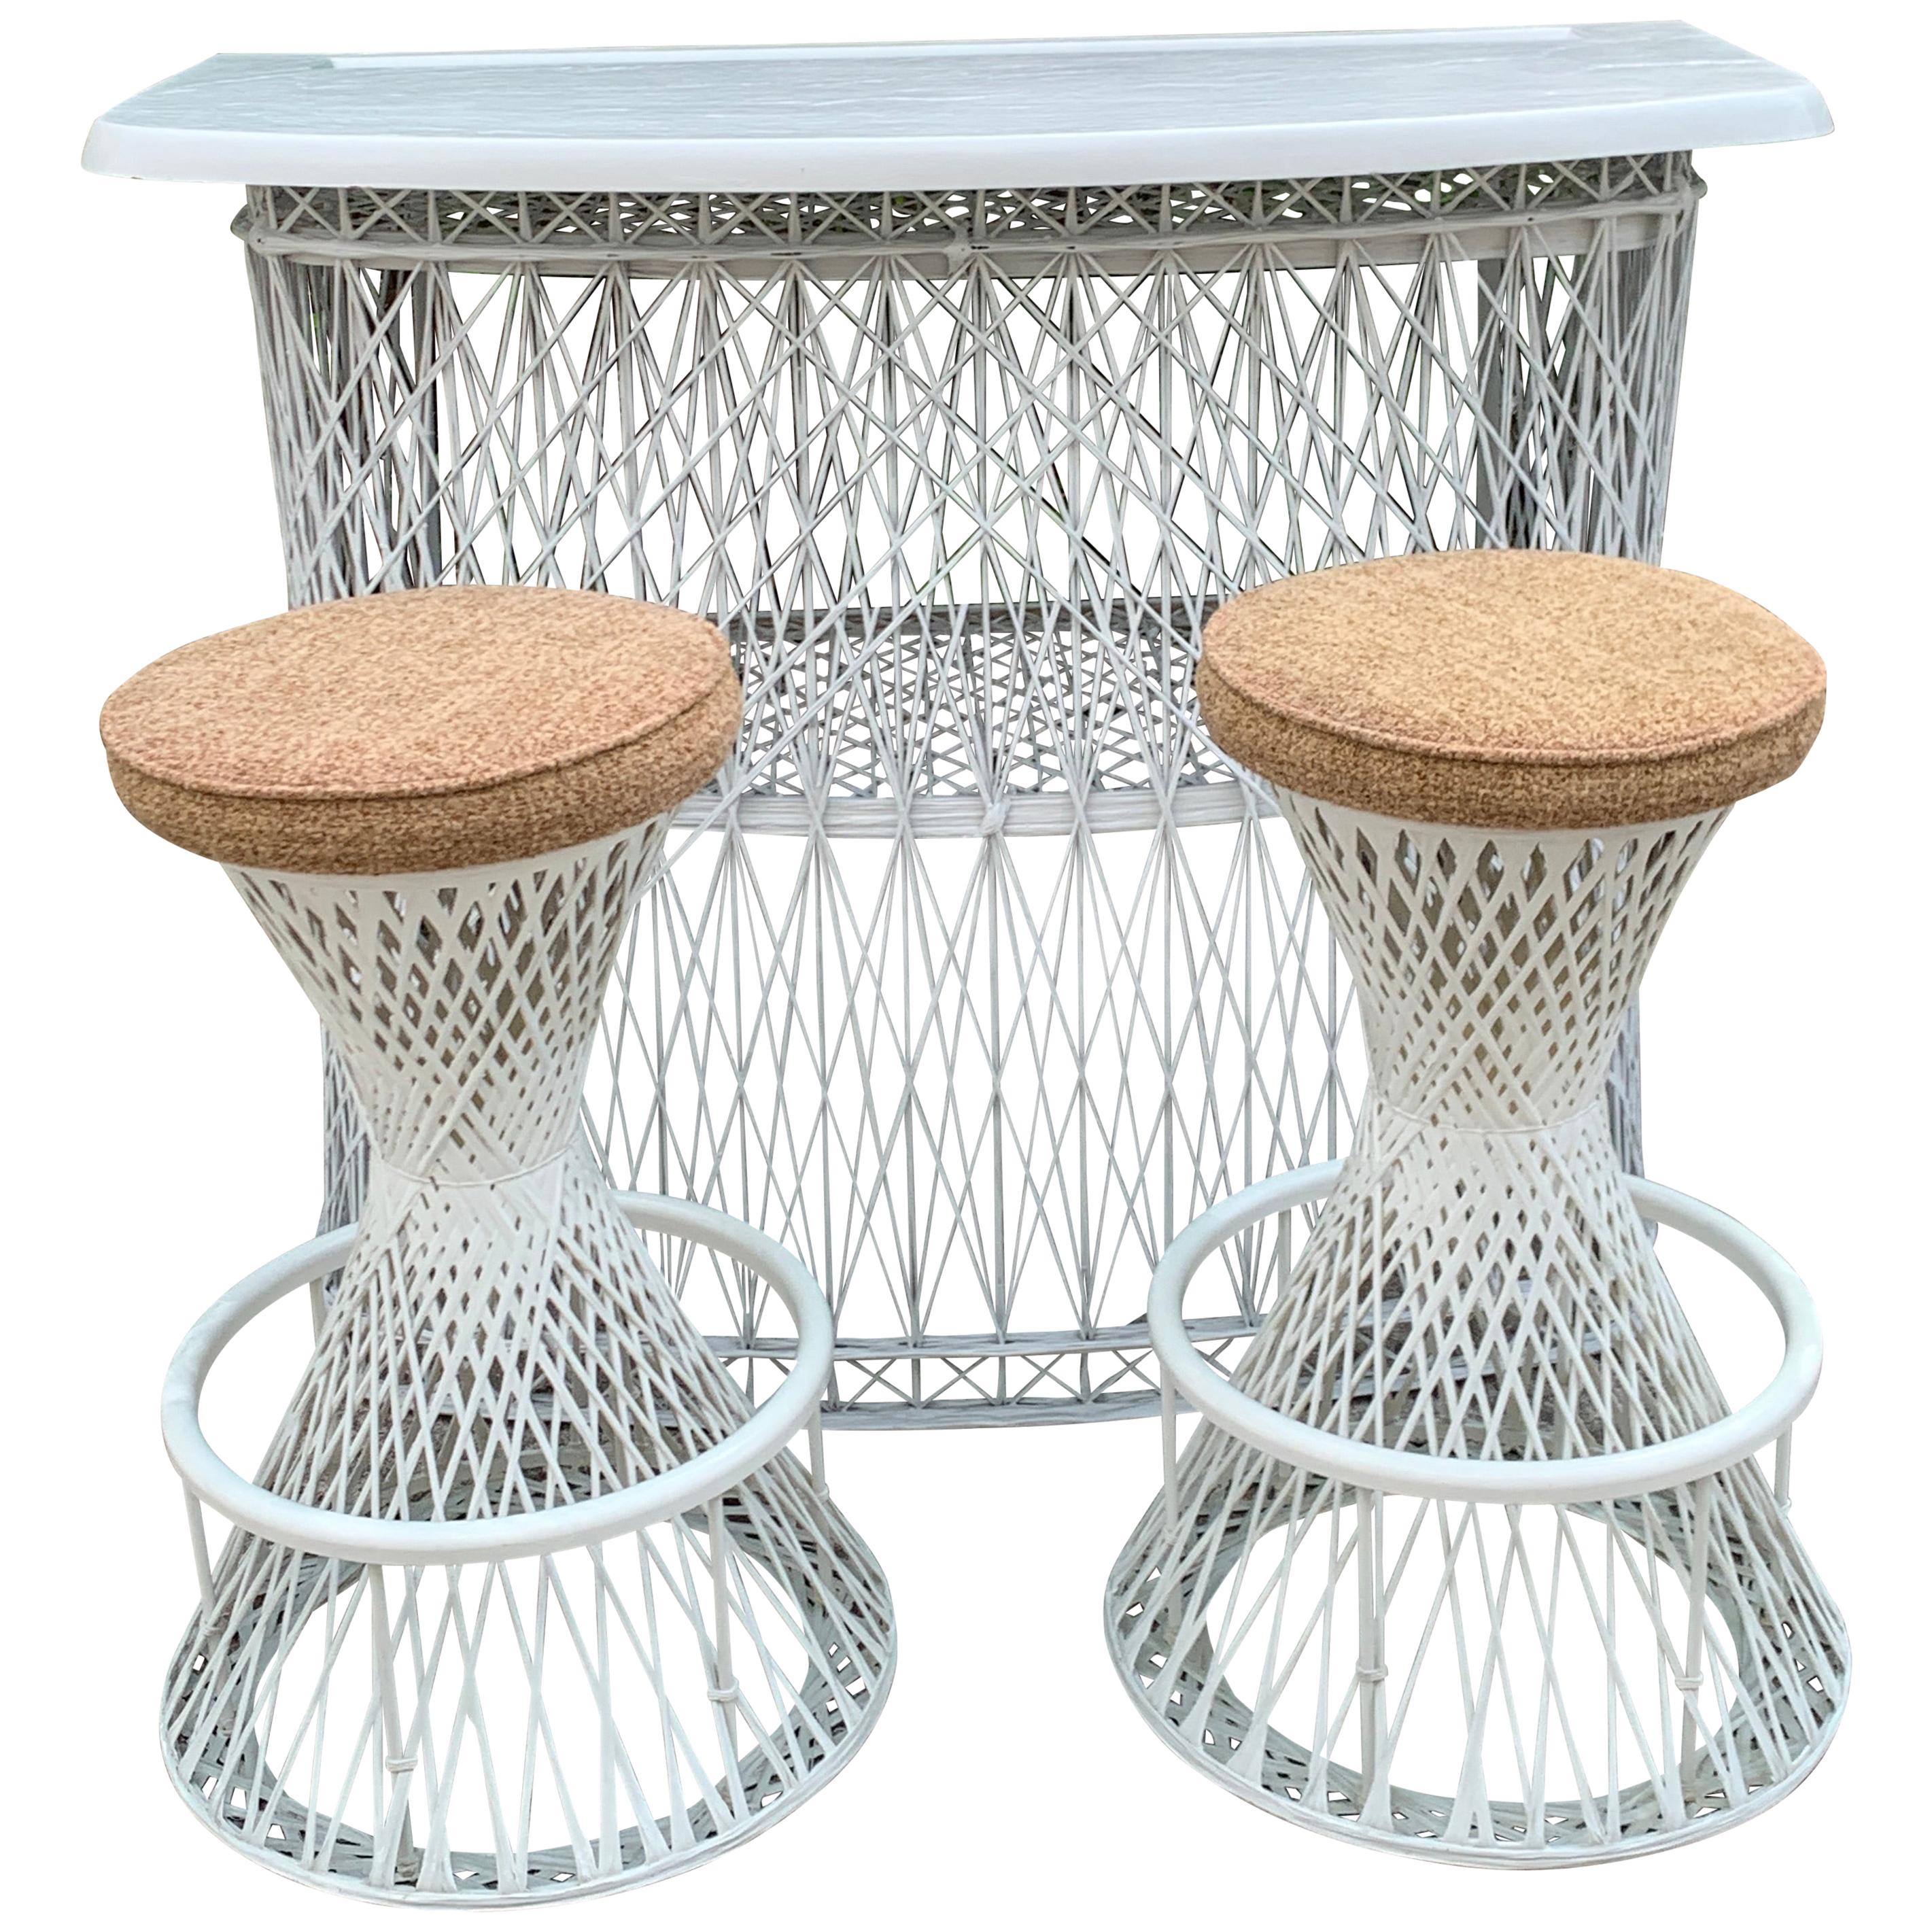 Russell Woodard Woven Fiberglass Bar and Two Stools, Restored For Sale